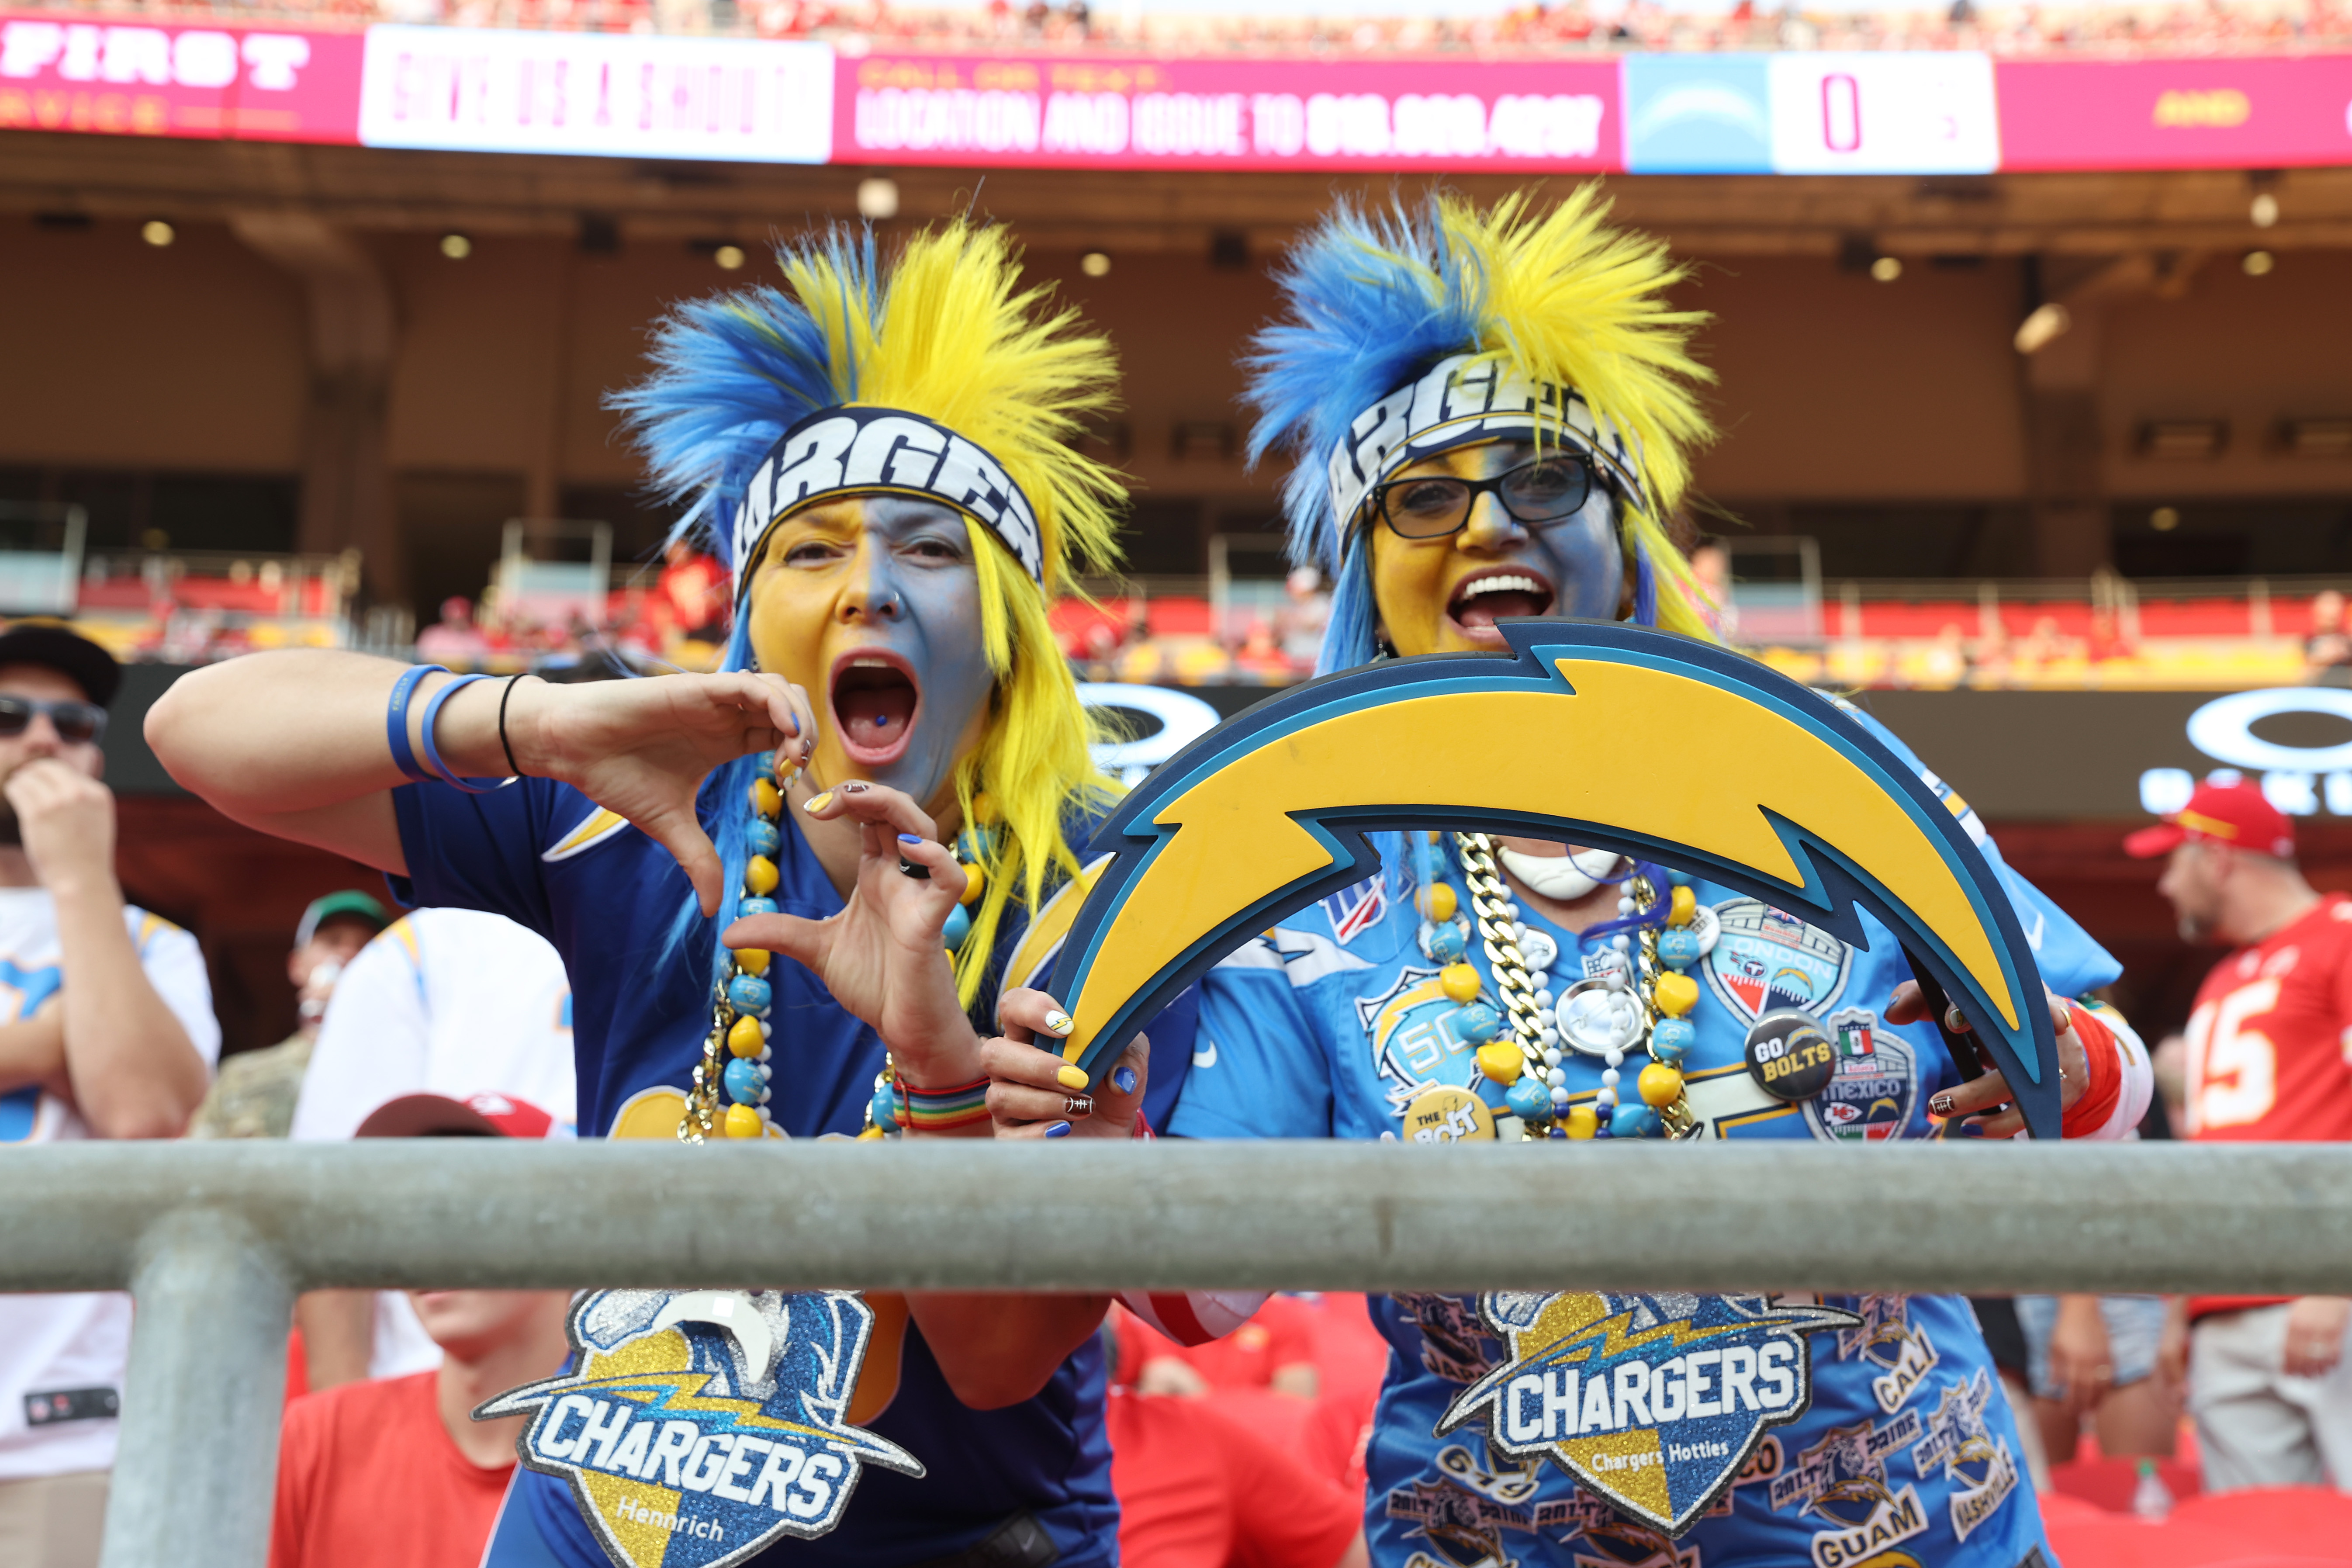 Fans fight at SoFi Stadium after brawl between Chargers and